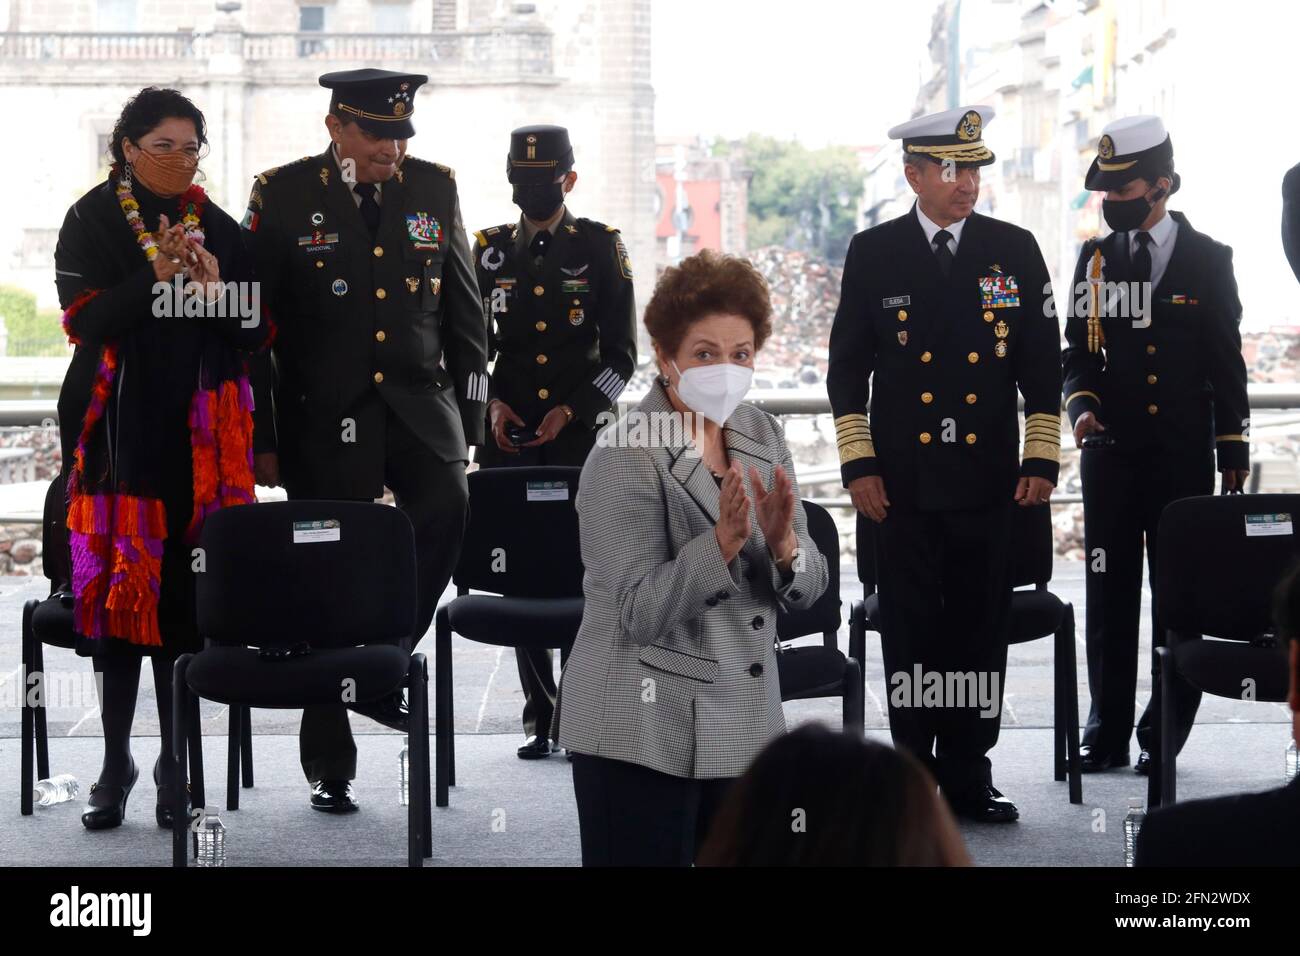 Mexico City, Mexico. 13th May, 2021. MEXICO CITY, MEXICO - MAY 13:The former president of Brazil, Dilma Rousseff, during the ceremony 'Mexico - Tenochtitlan, more than seven centuries of history' at the Museo del Templo Mayor on May 13, 2021 in Mexico City, Mexico. (Photo by Eyepix/Sipa USA) Credit: Sipa USA/Alamy Live News Stock Photo